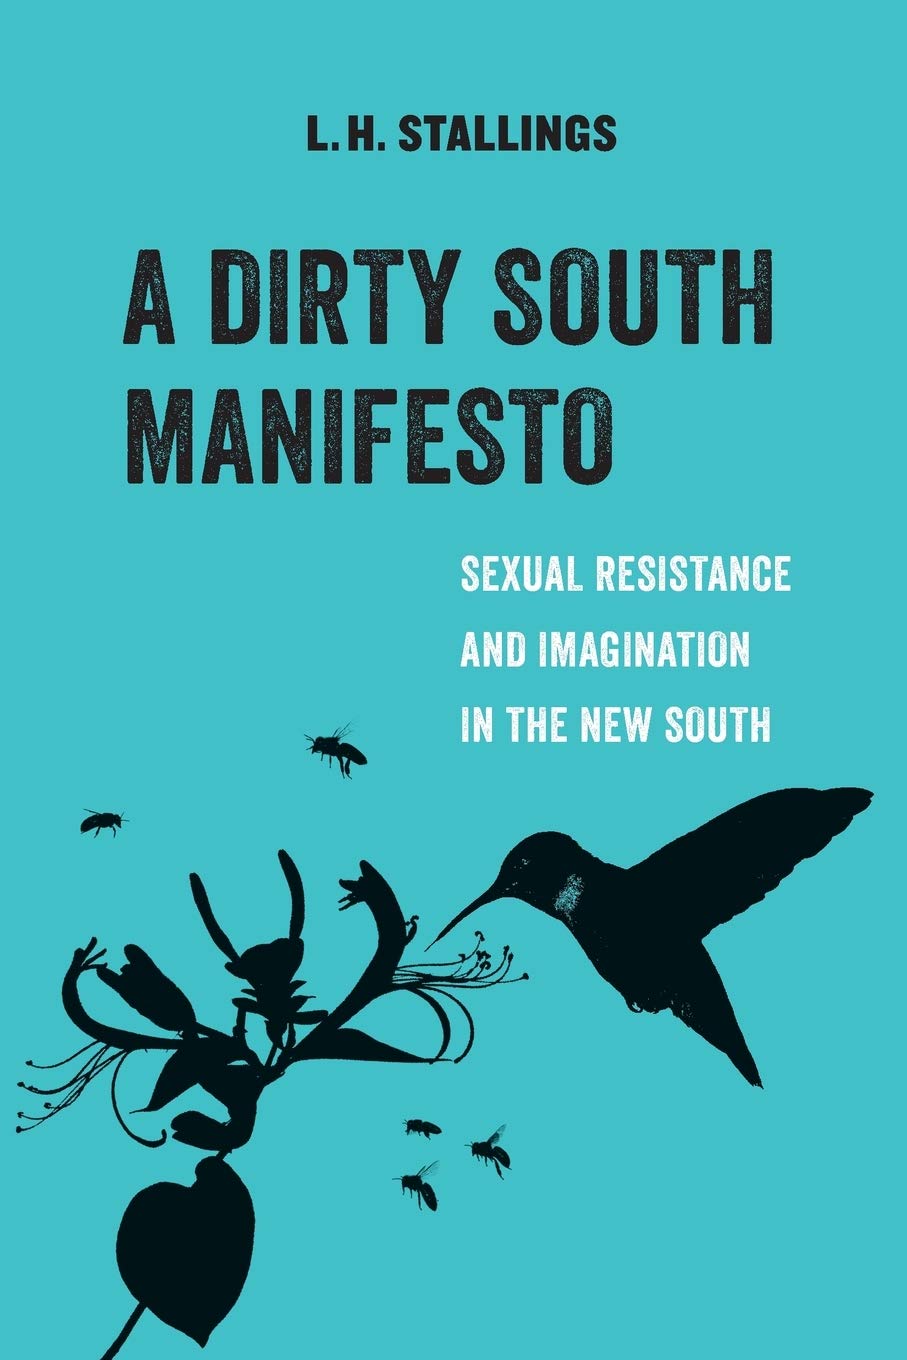 A dirty south manifesto bookcover